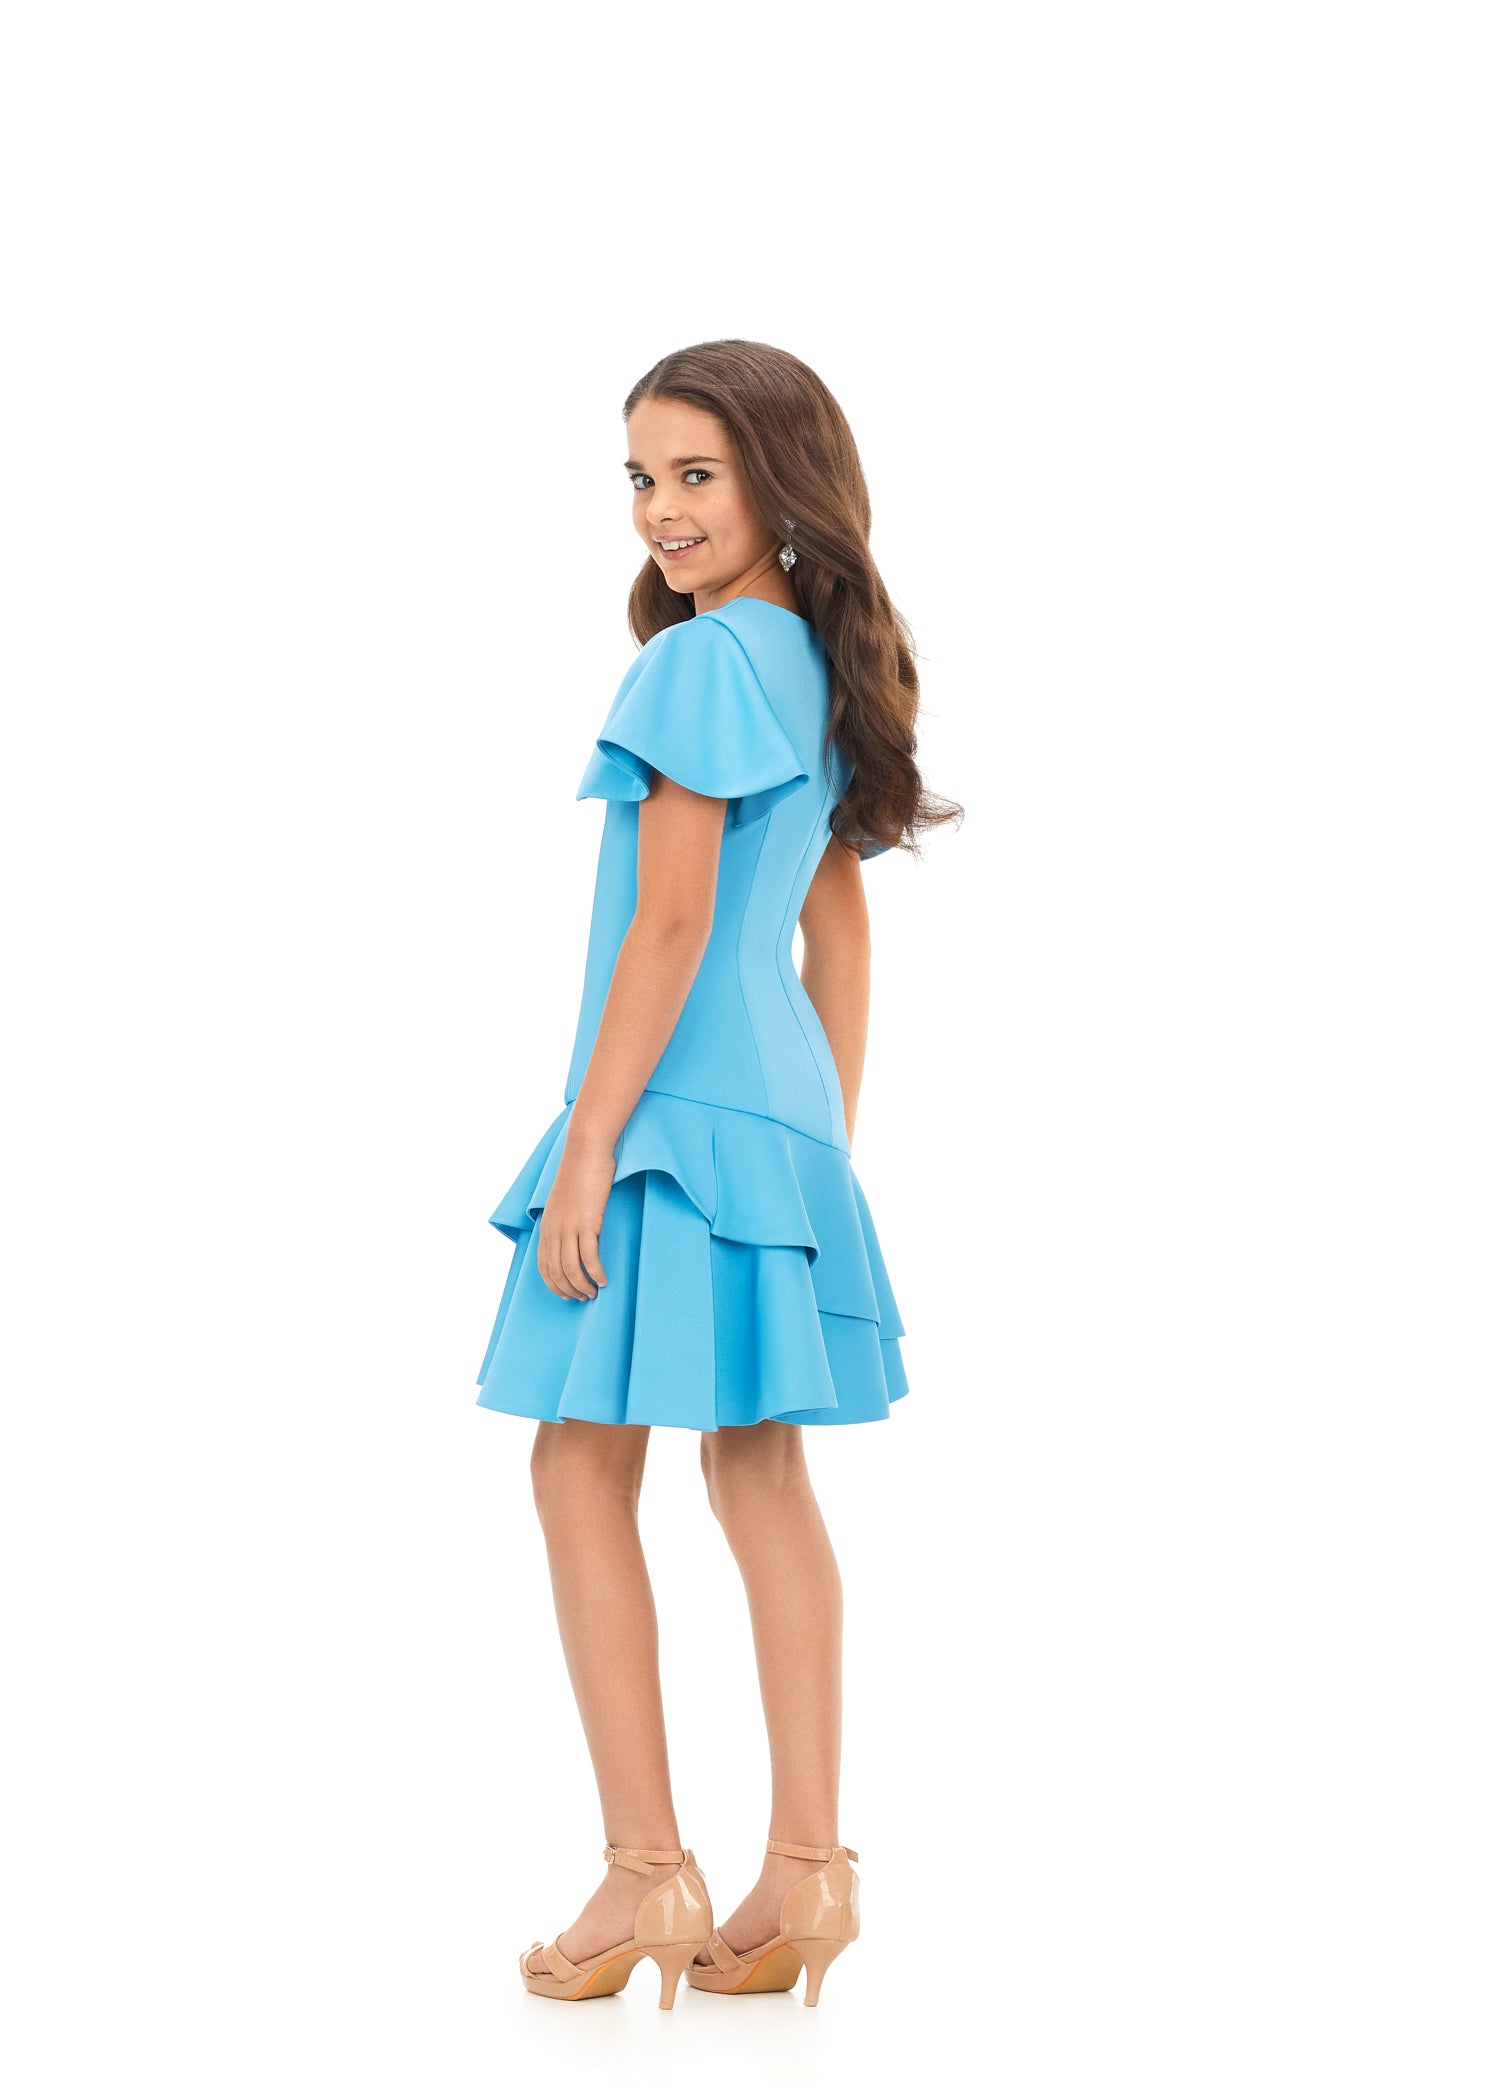 Ashley Lauren Kids 8167 Girls Crepe Cocktail Dress with Ruffle Details A crepe dress perfect for any event. This dress features flutter sleeves and an asymmetric ruffle skirt turquoise